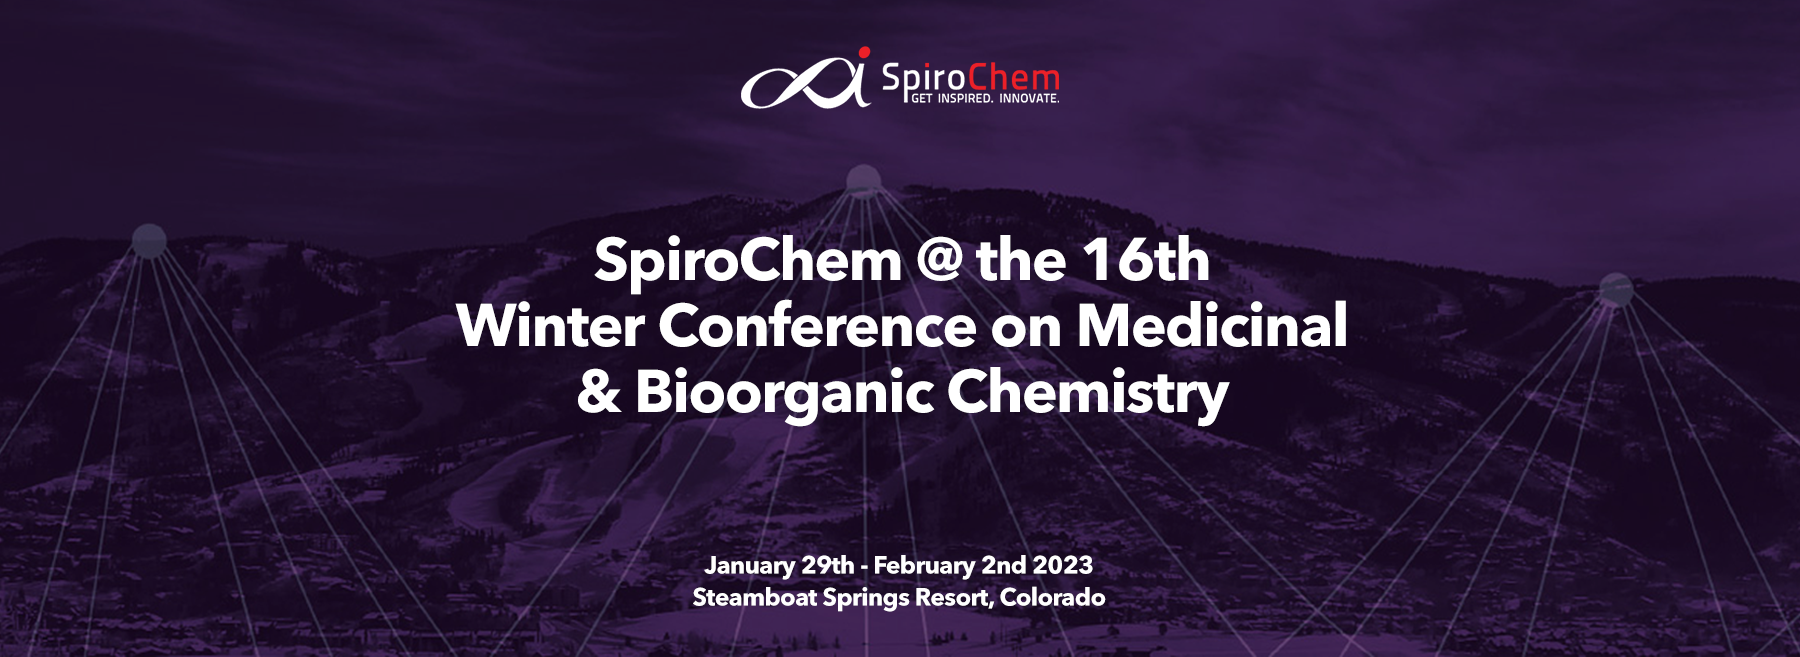 SpiroChem @ the 16th Winter Conference on Medicinal & Bioorganic Chemistry in Colorado